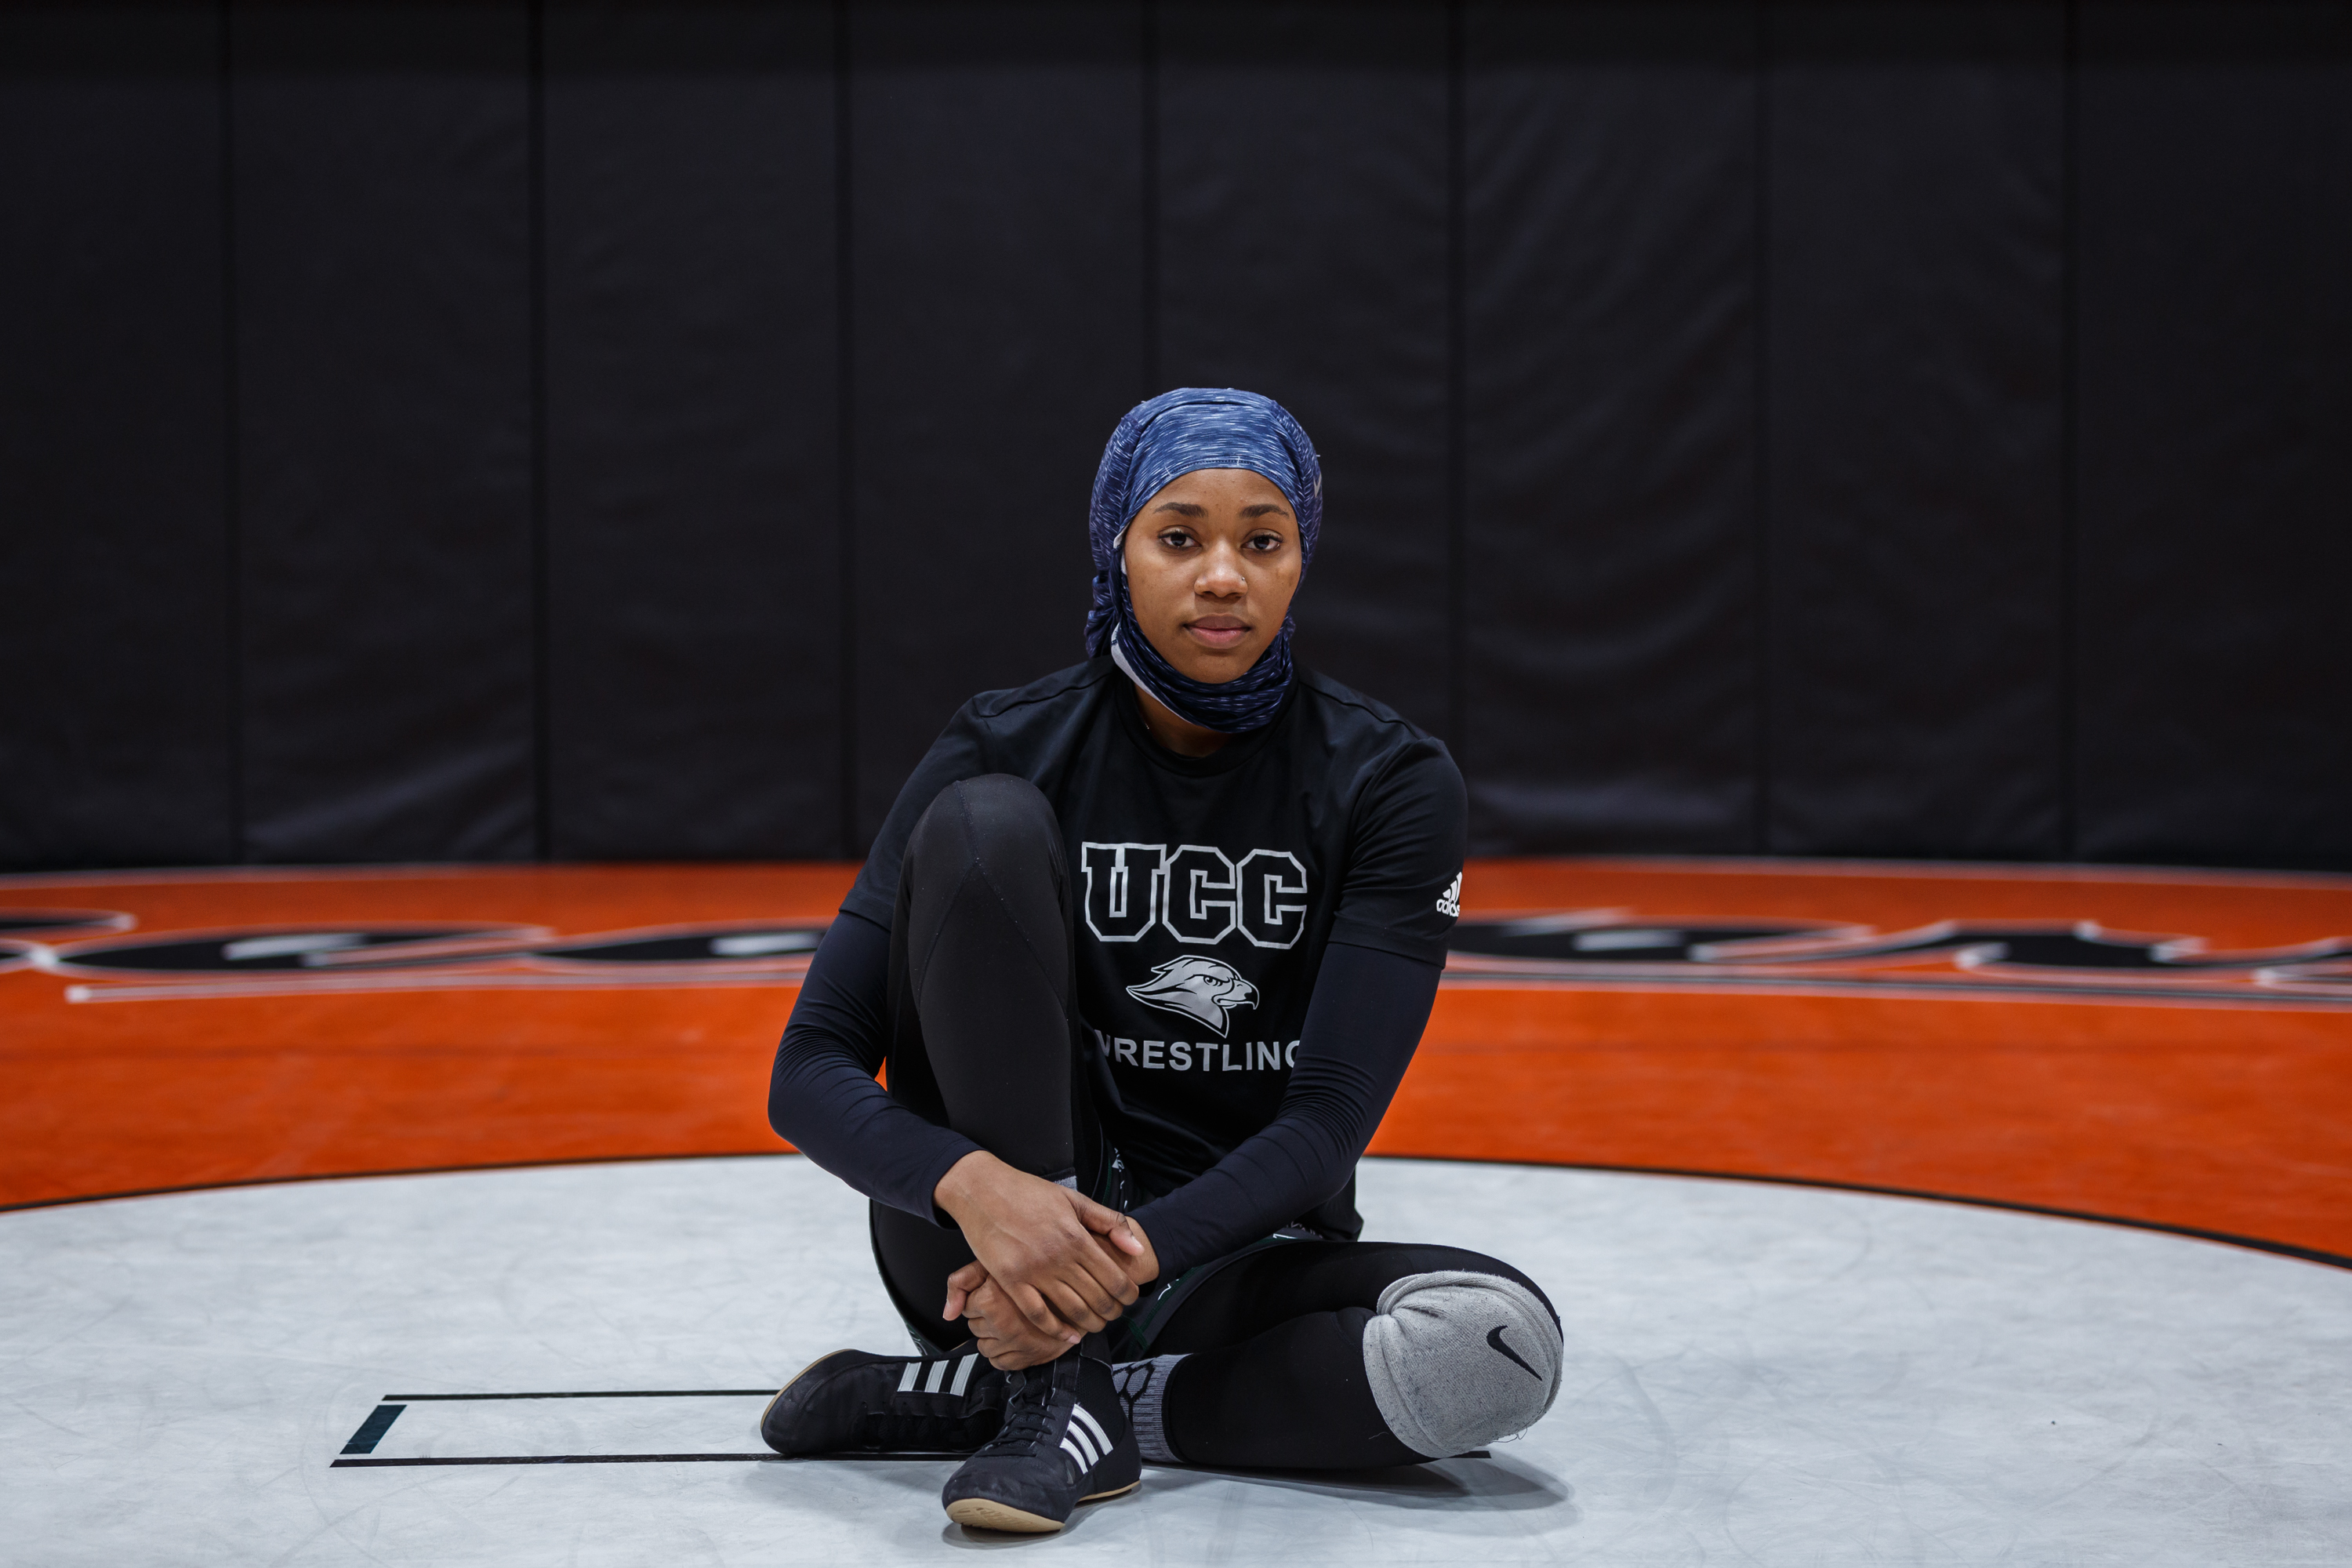 Muslim Women Wrestlers Say They Face Discrimination HuffPost Women pic